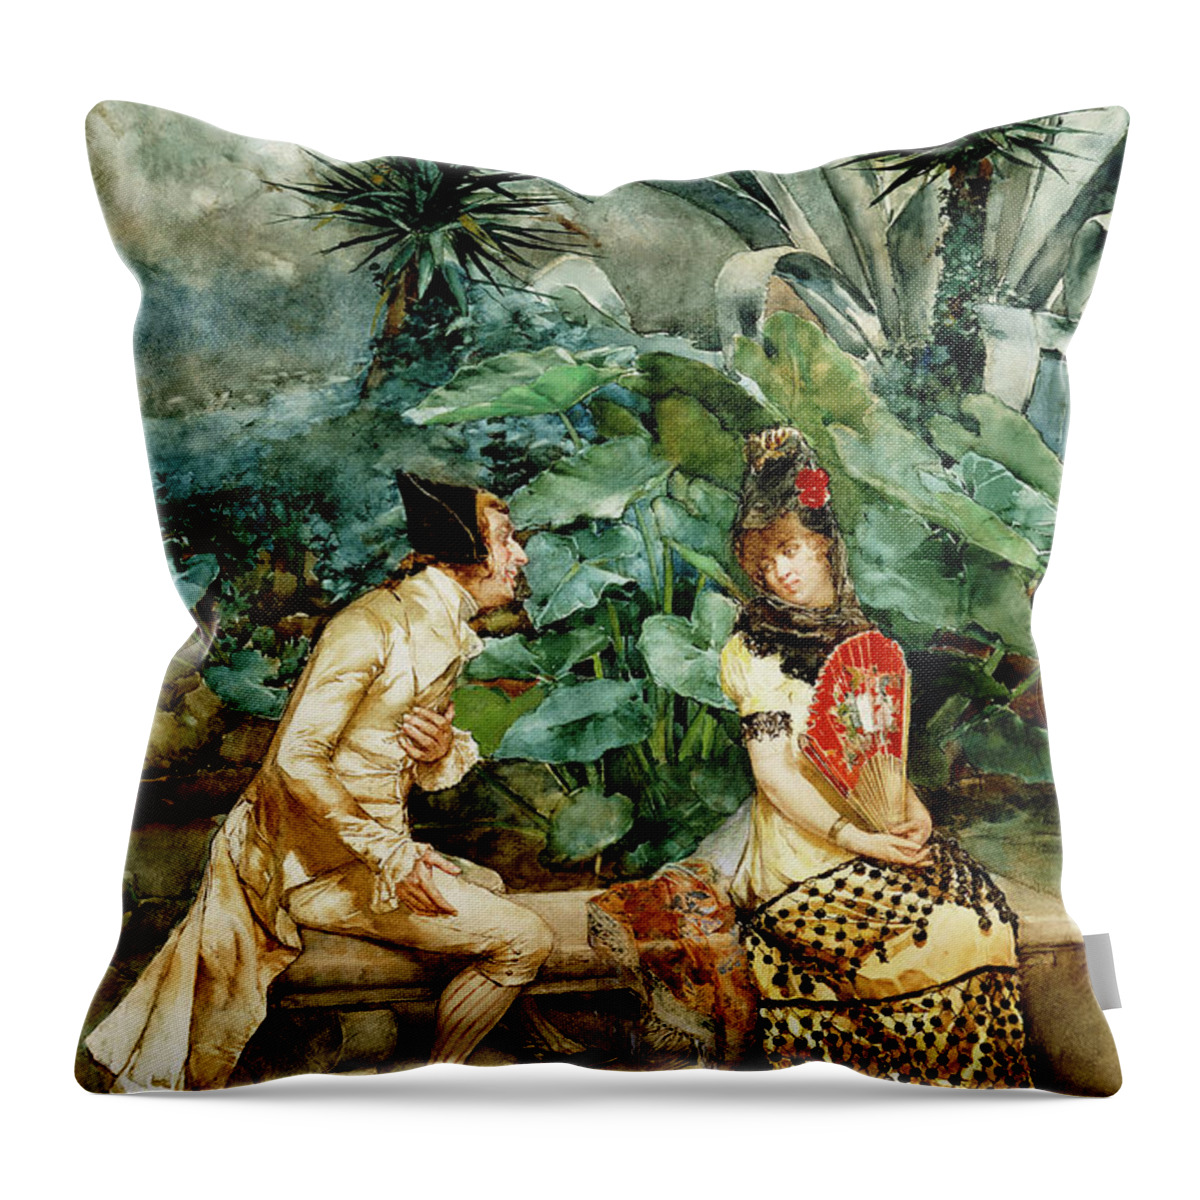 I Love You Throw Pillow featuring the painting A Declaration of Love by Ettore Simonetti